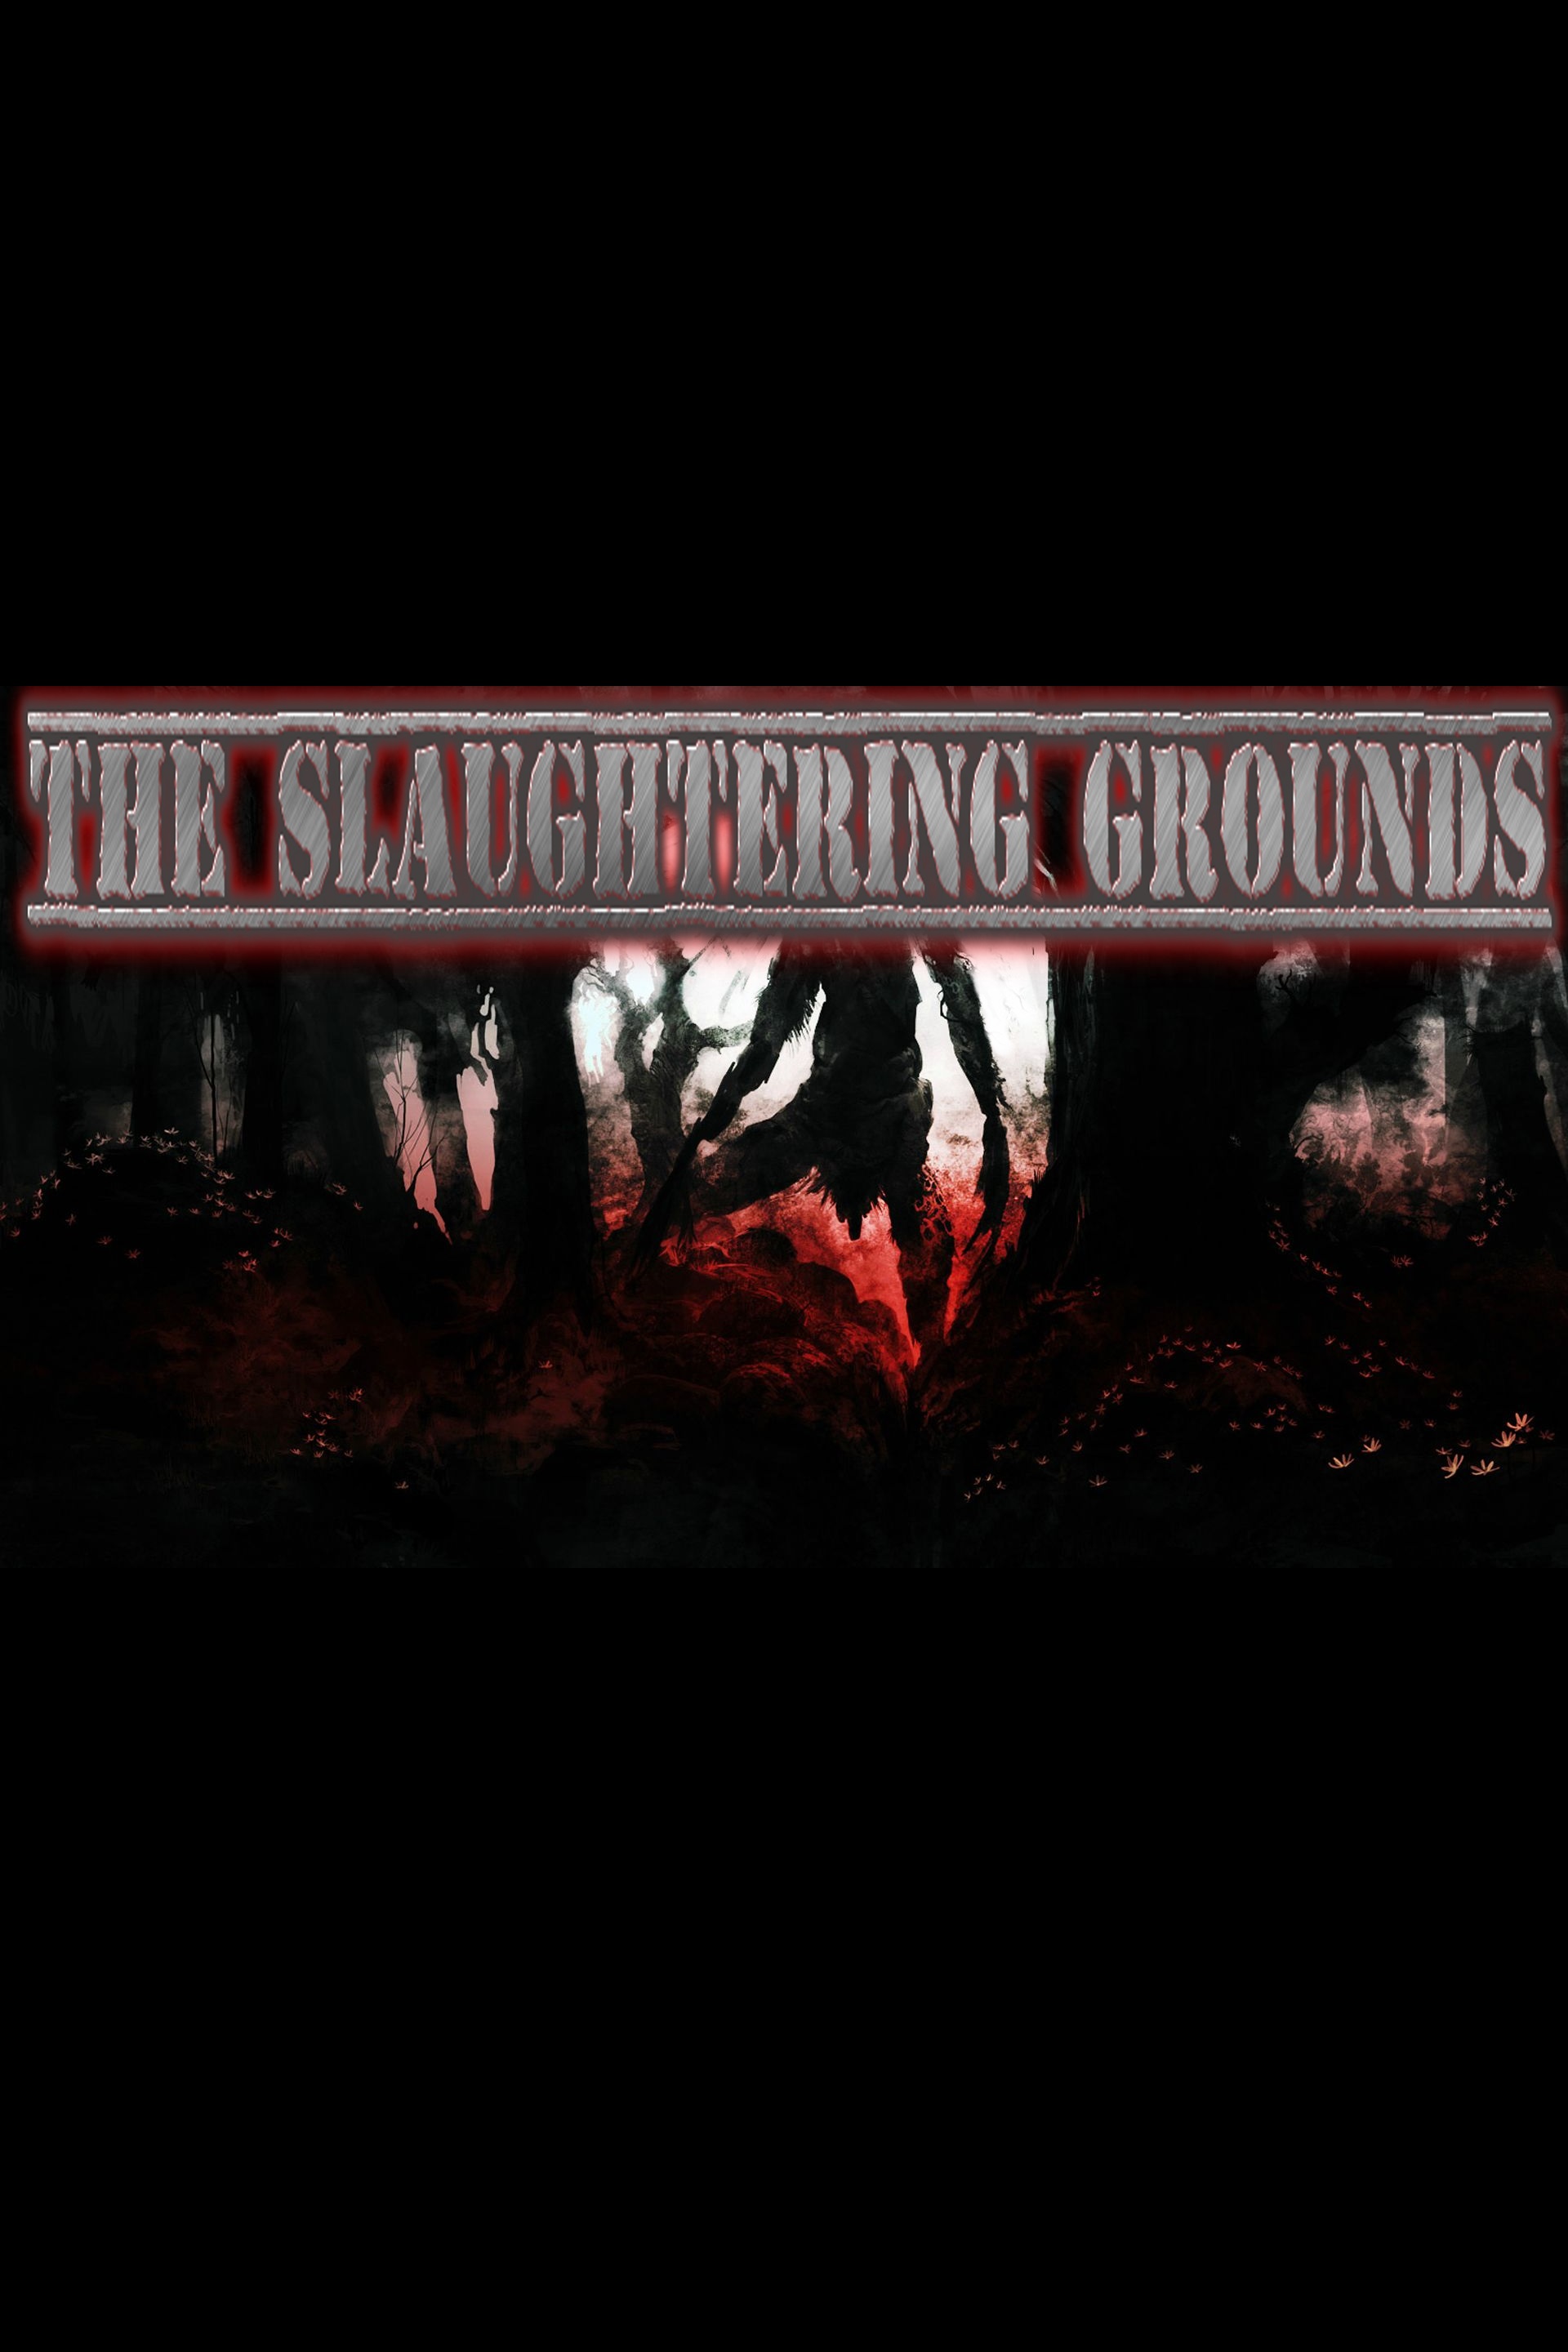 Bote de The Slaughtering Grounds